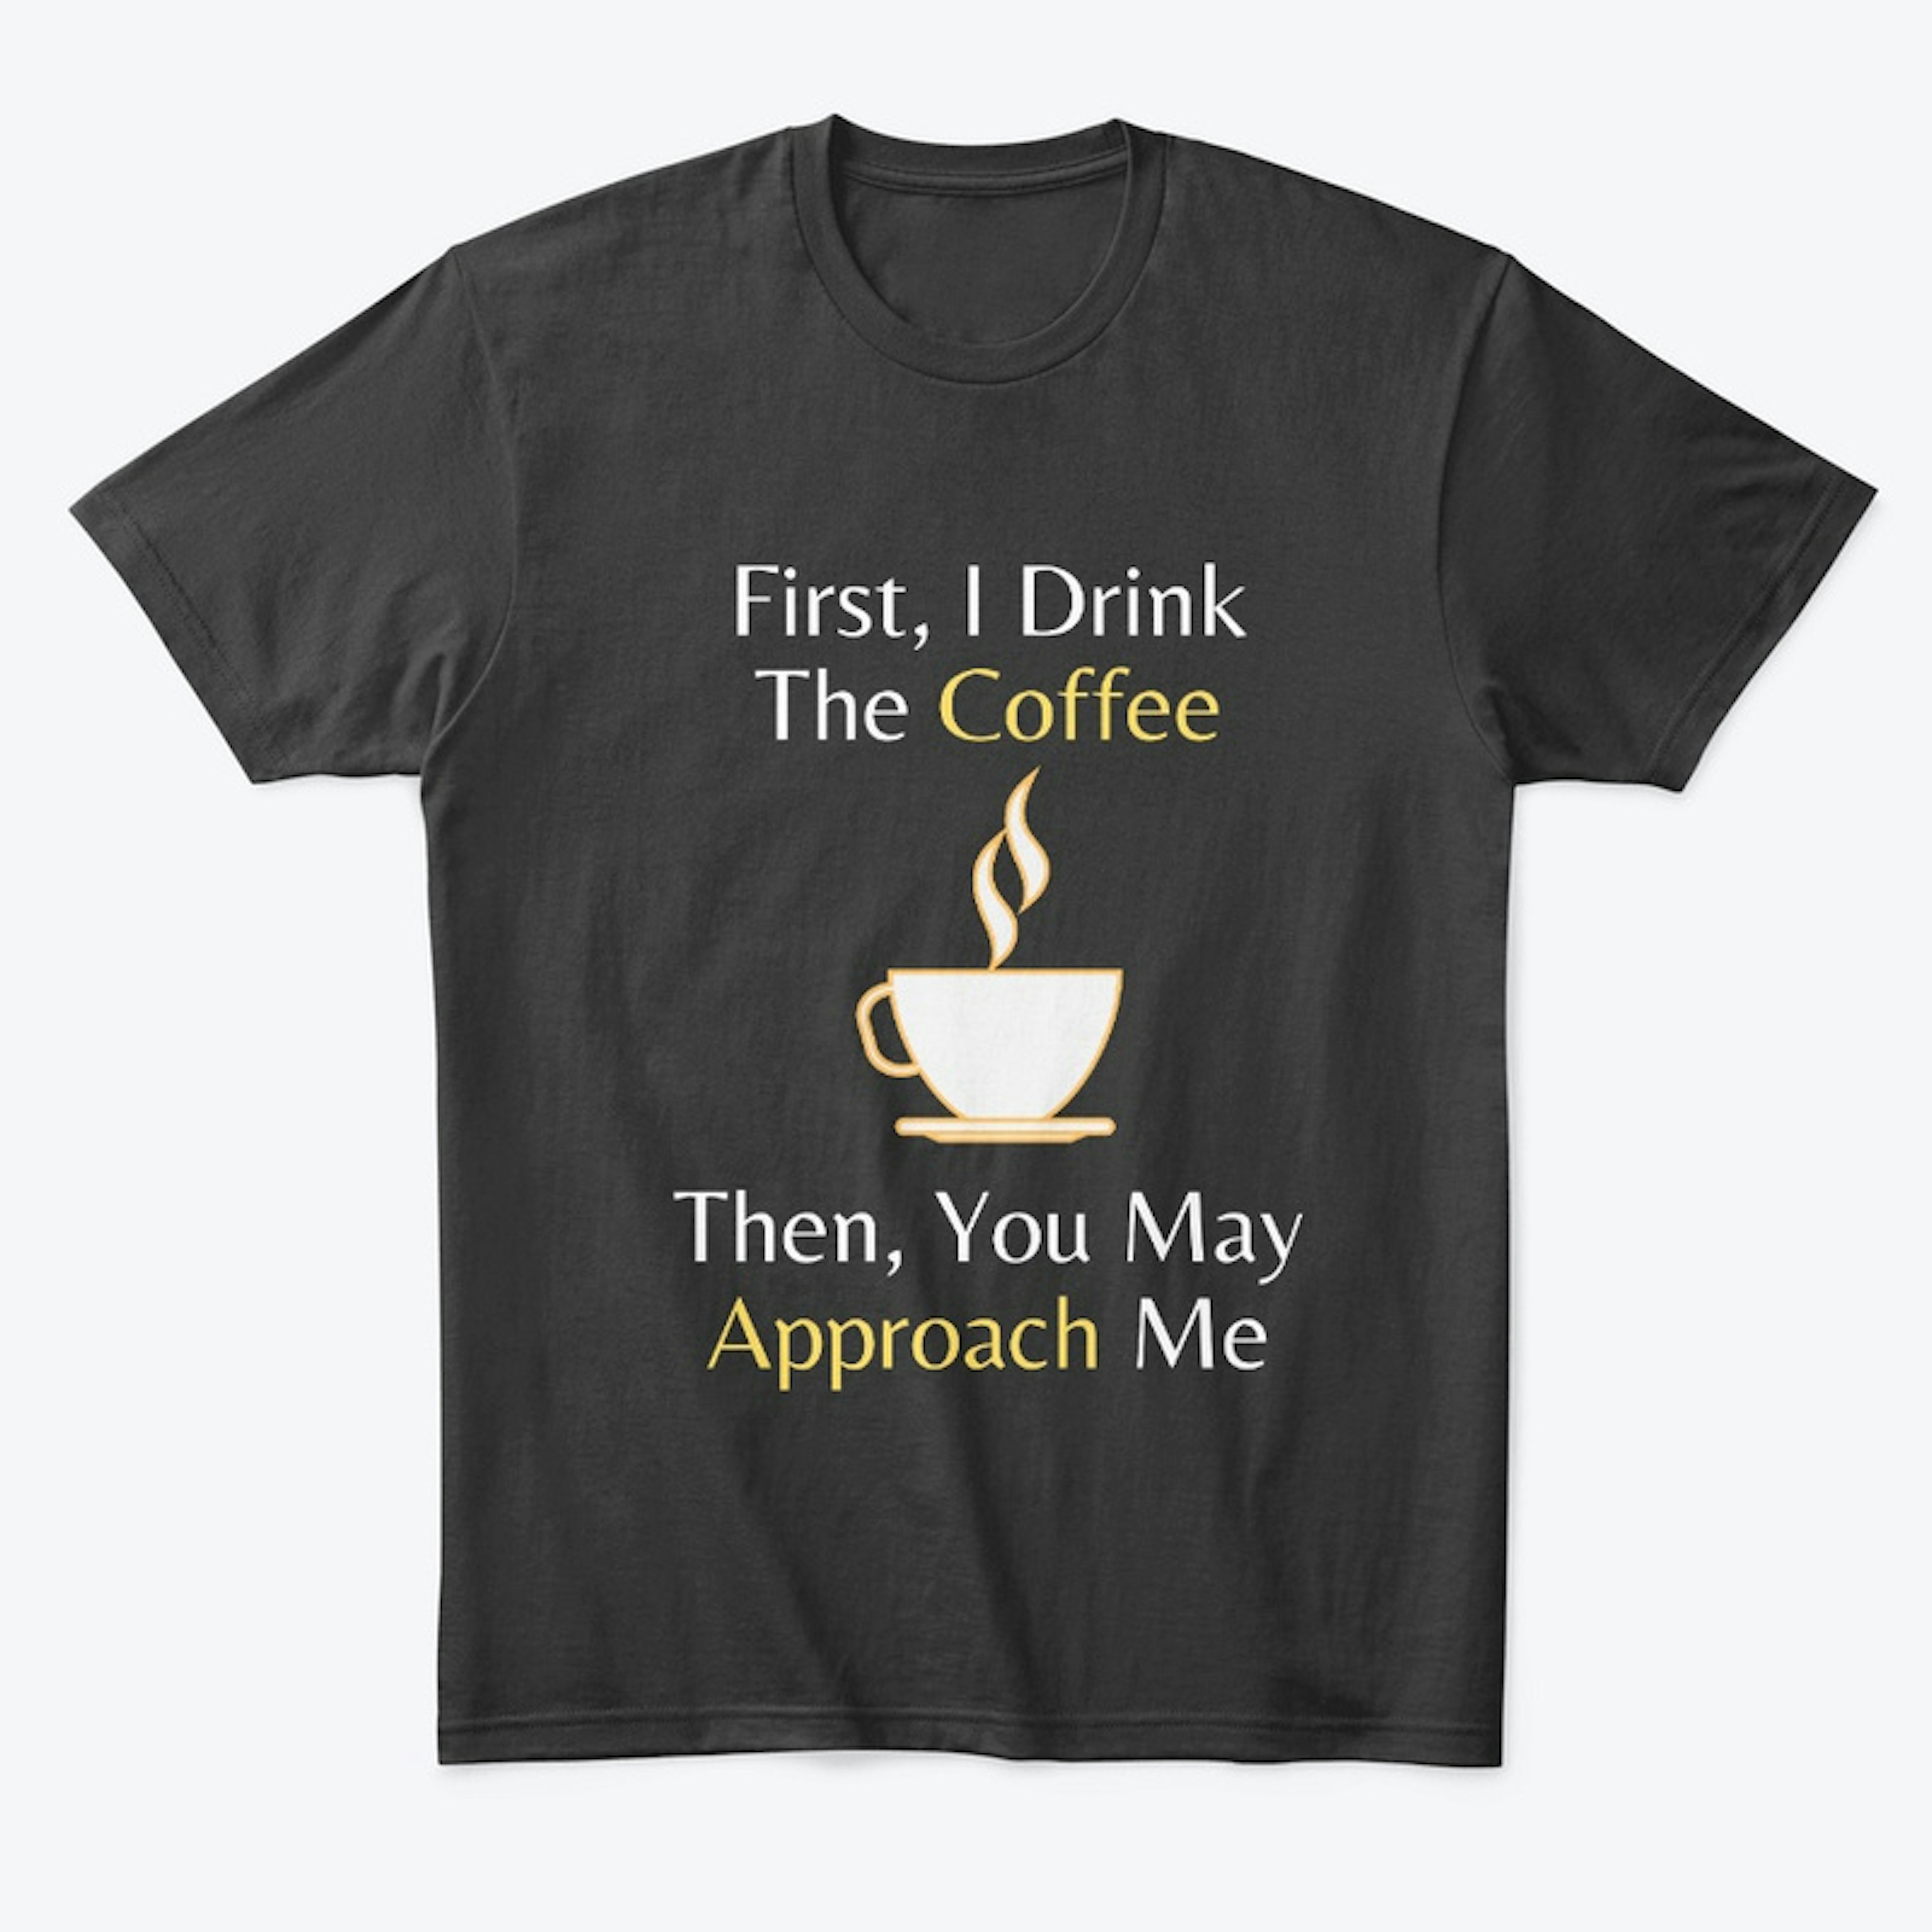 First, I Drink The Coffee